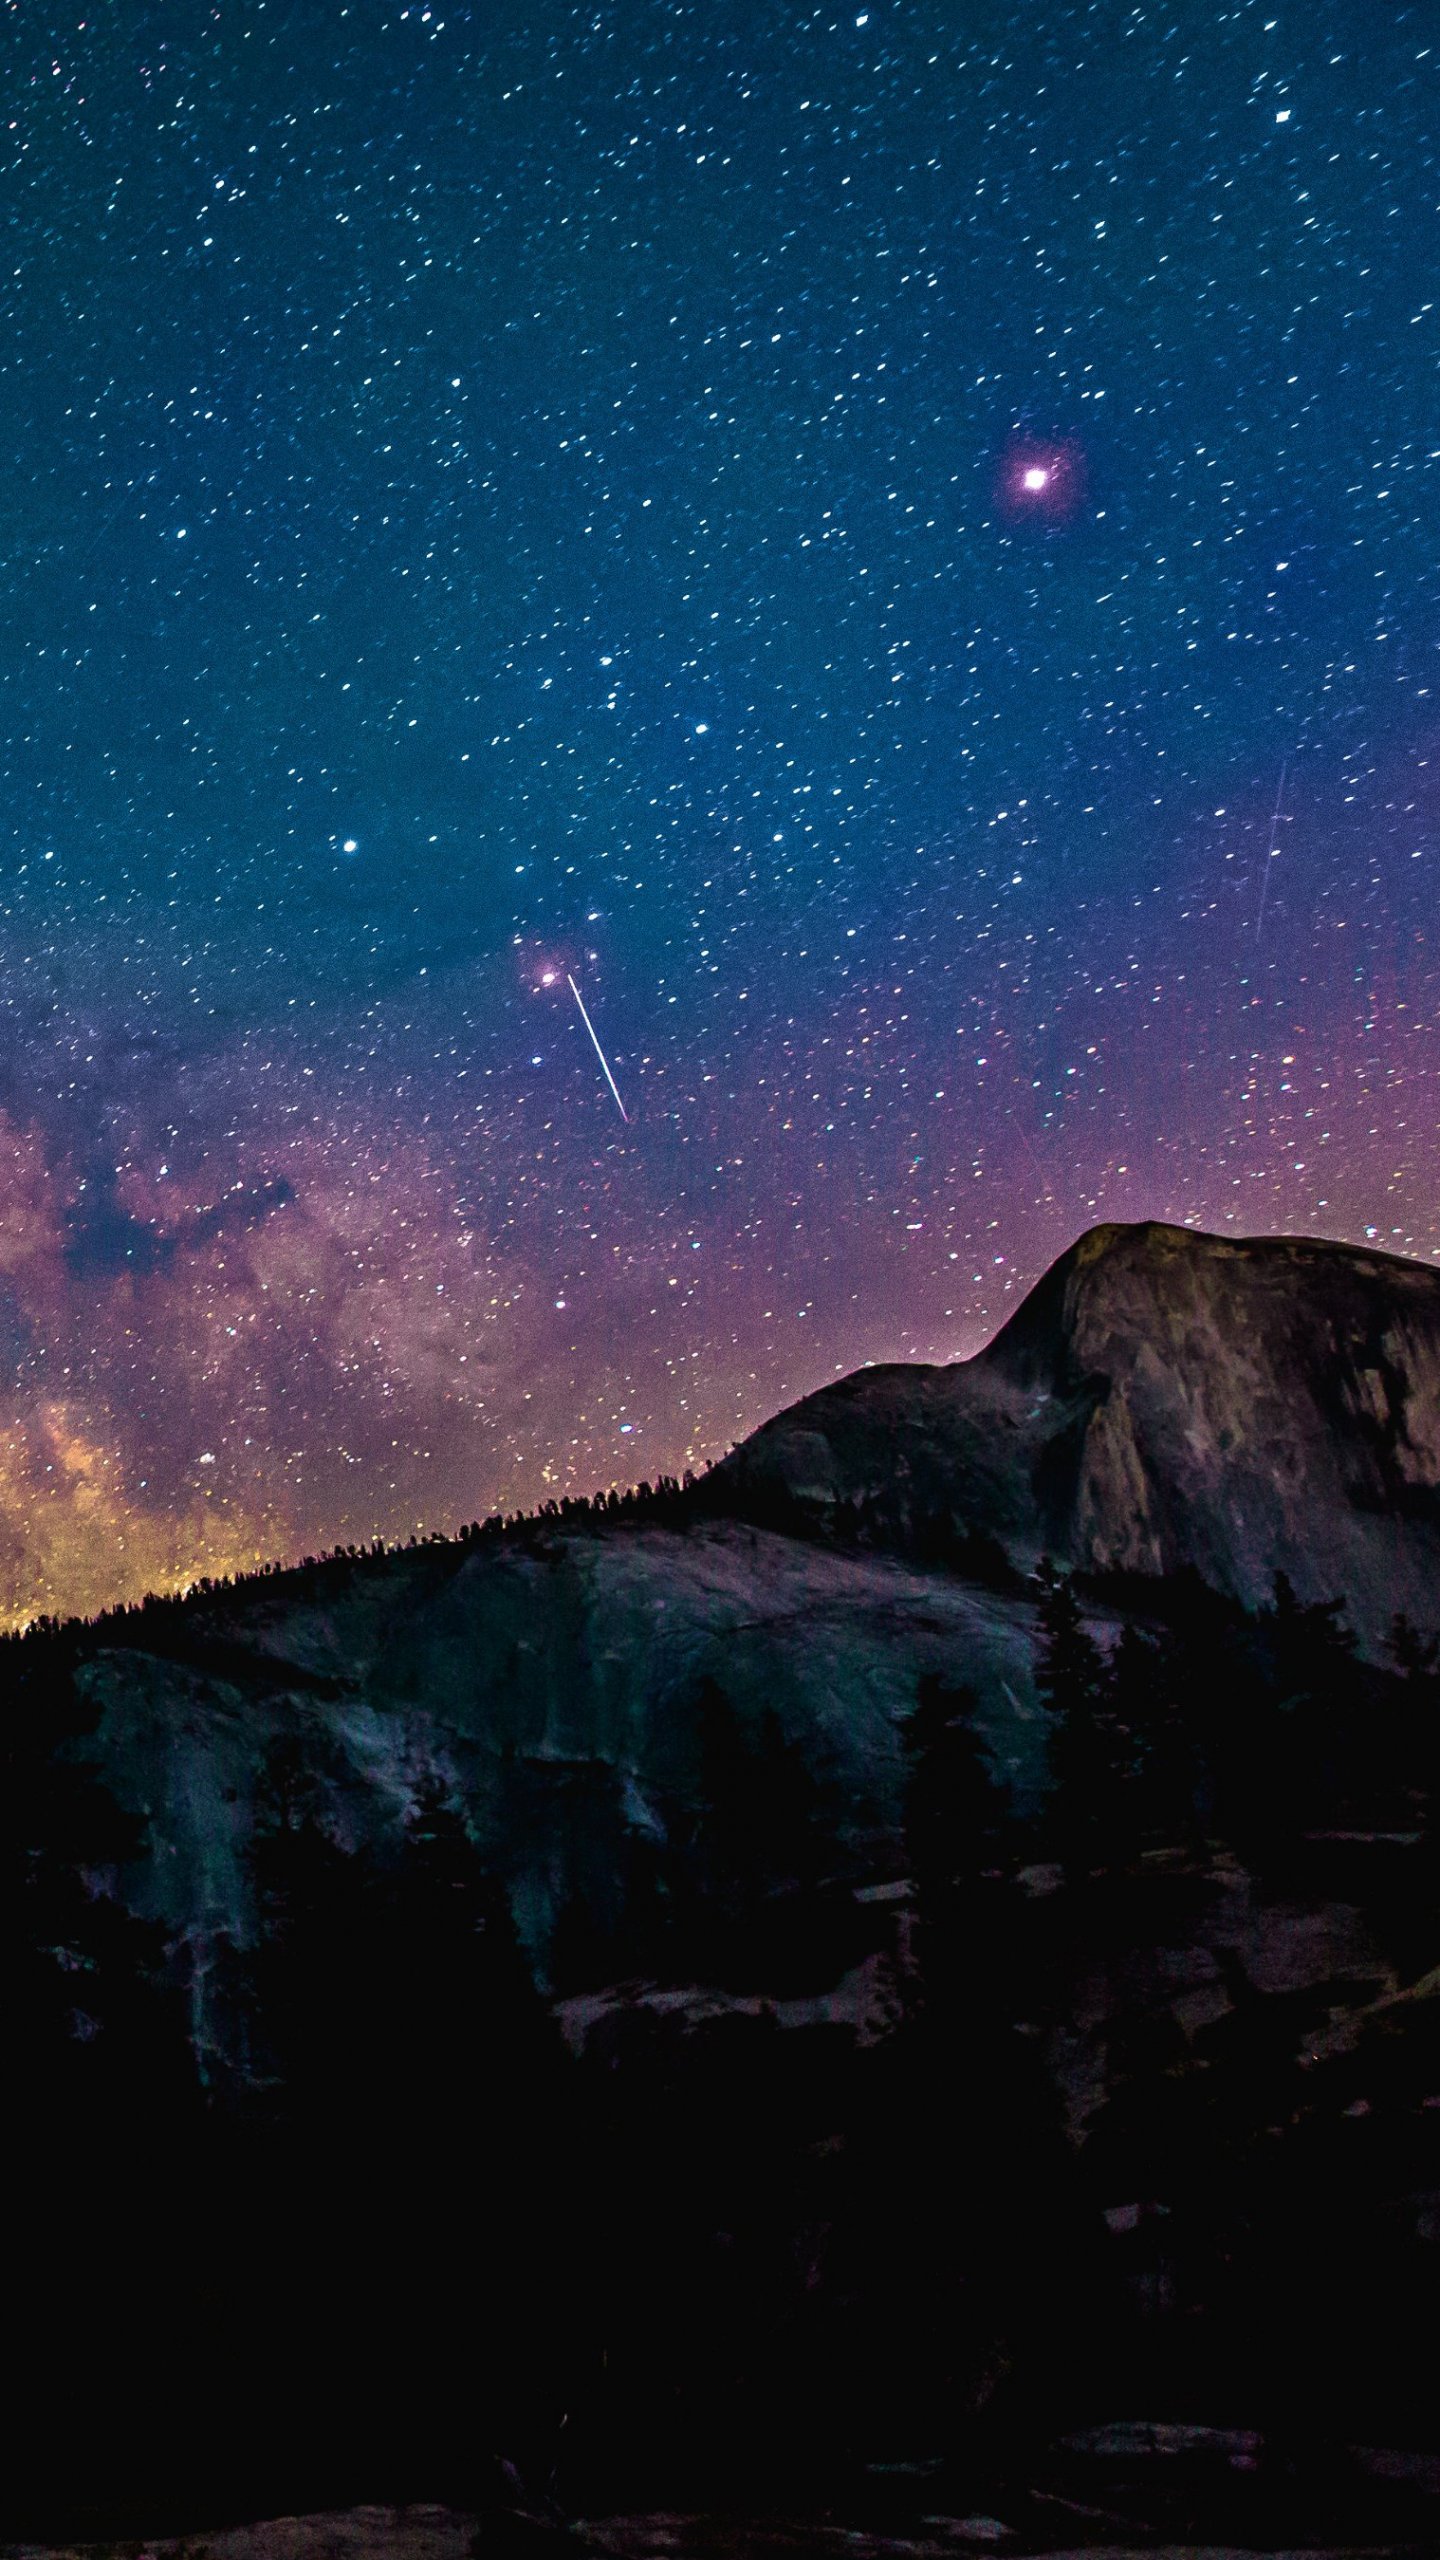 Milky Way Over Mountains Wallpaper - iPhone, Android & Desktop Backgrounds